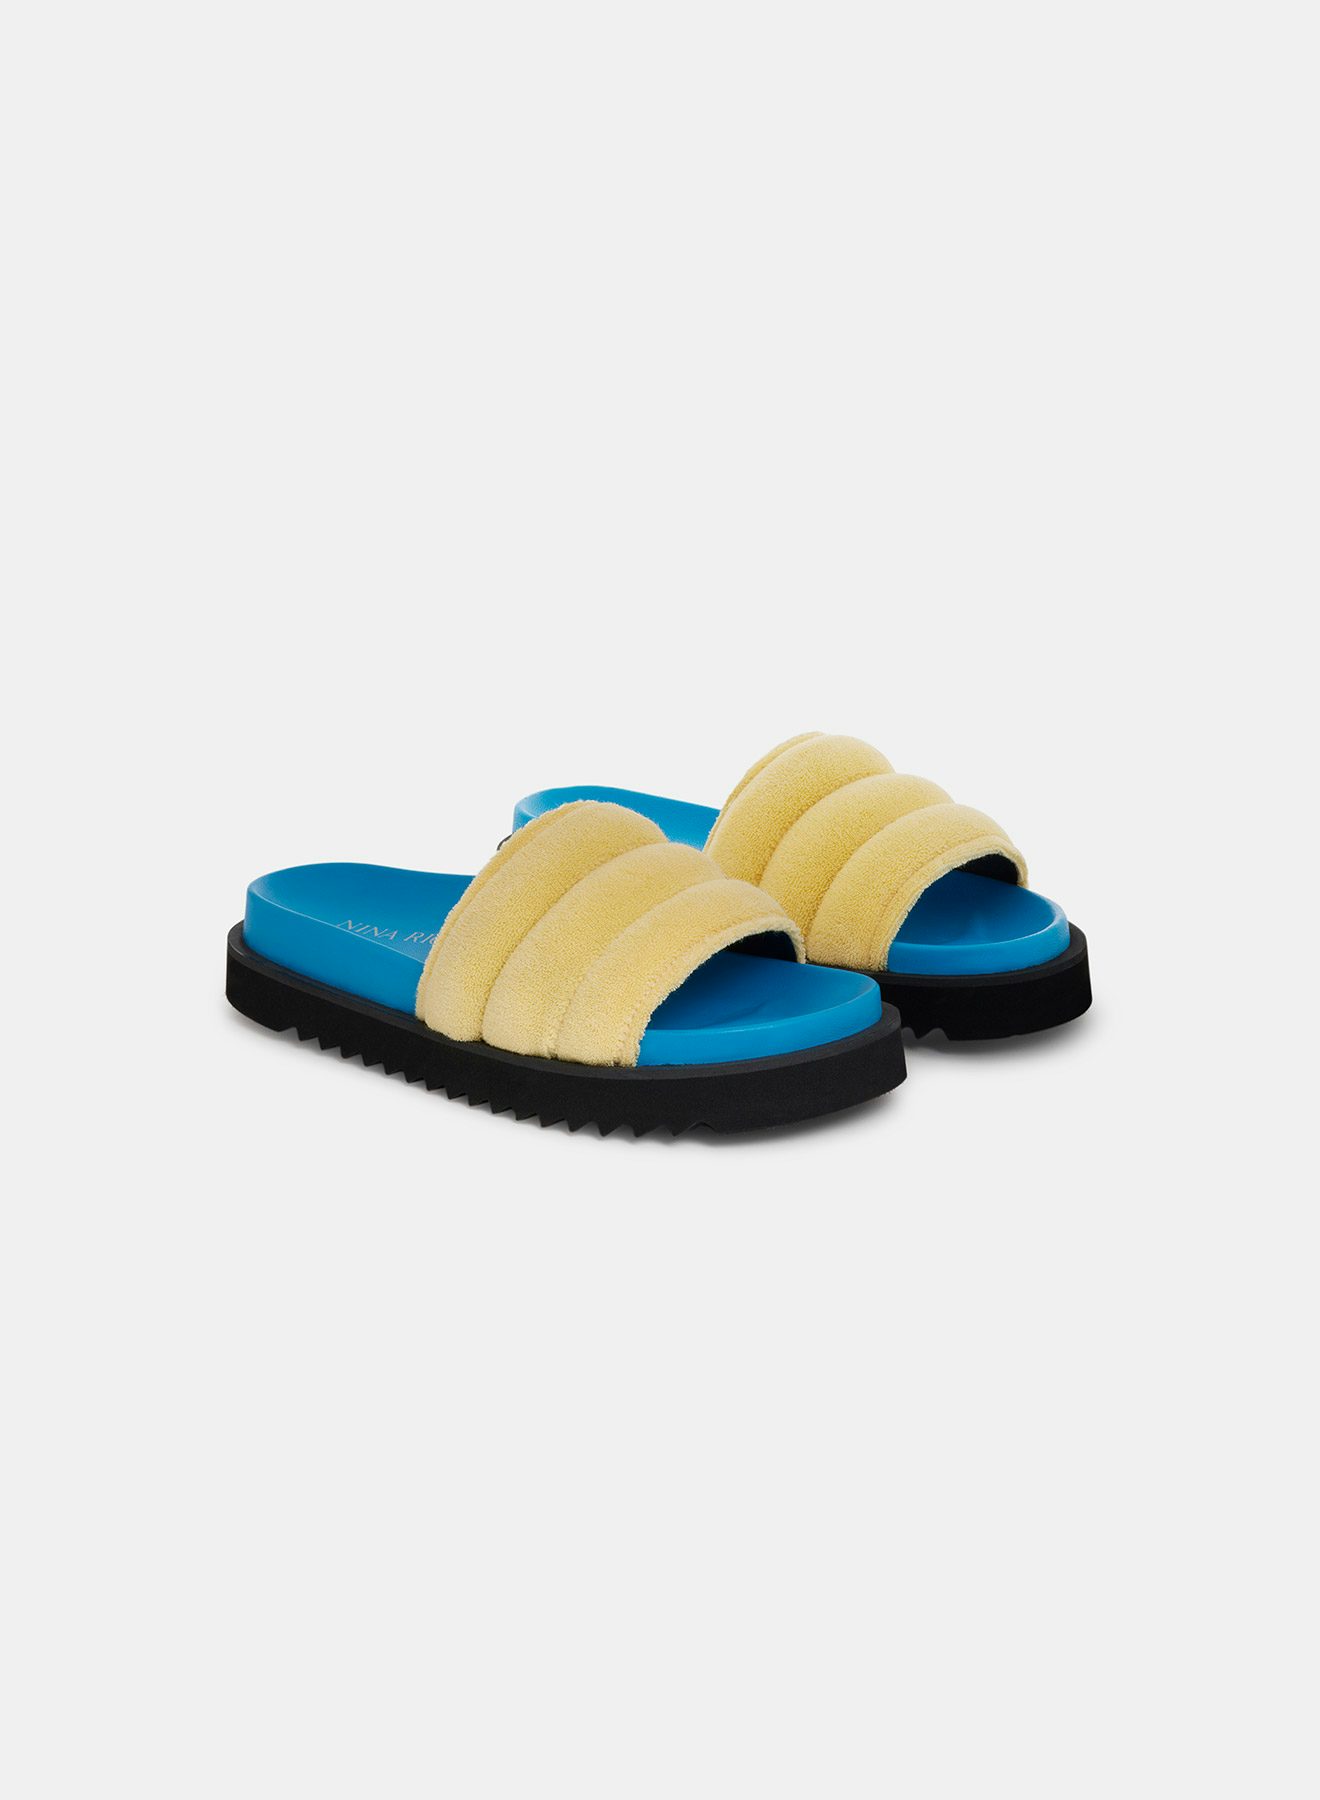 Vanilla Topstitched Terry Cloth Slides And Turquoise Leather Sole - Nina Ricci